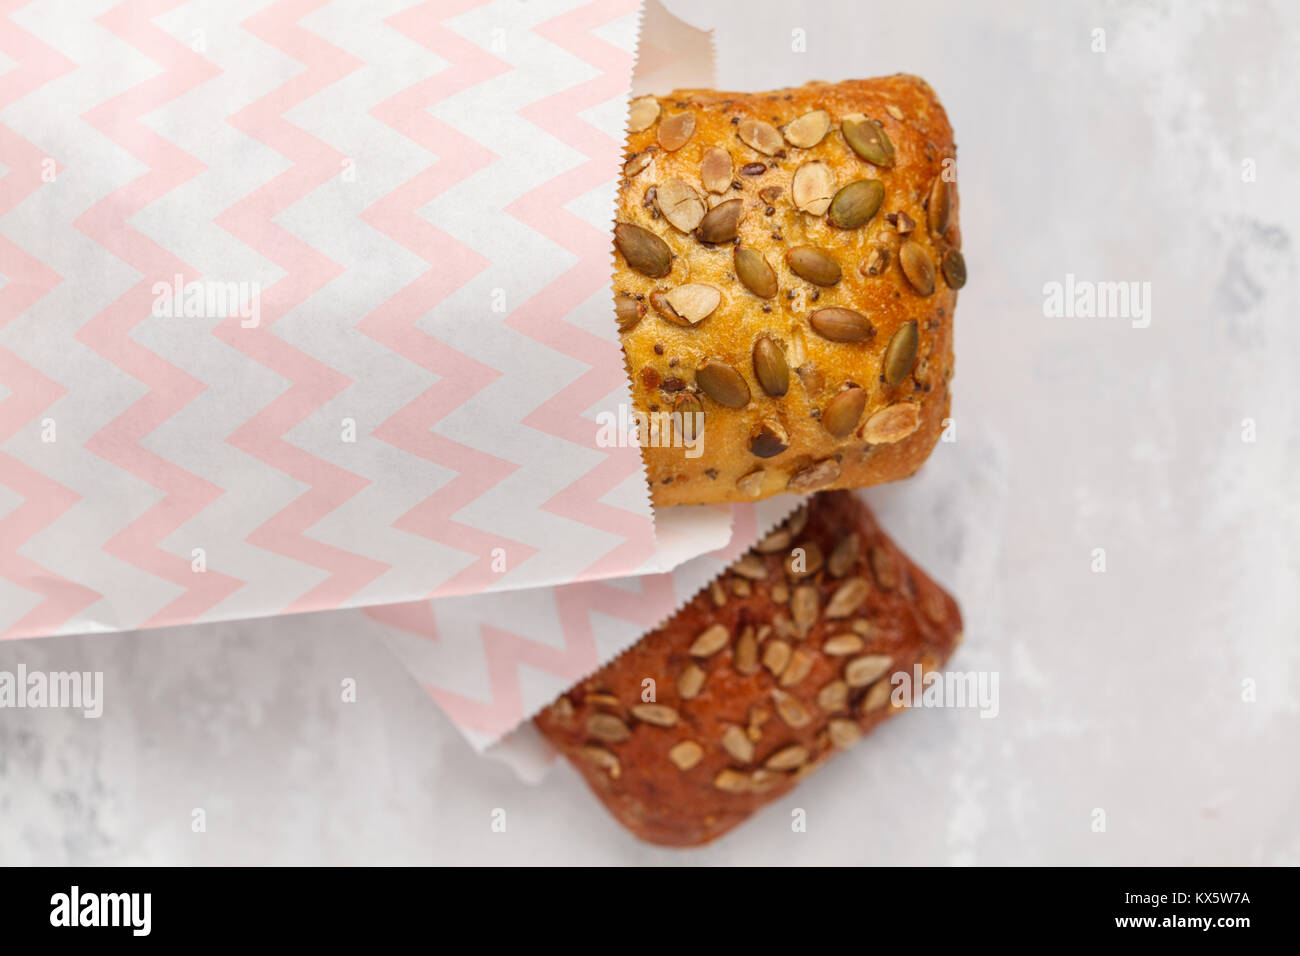 Healthy different ciabatta with pumpkin and sunflower seeds. Italian bread Stock Photo